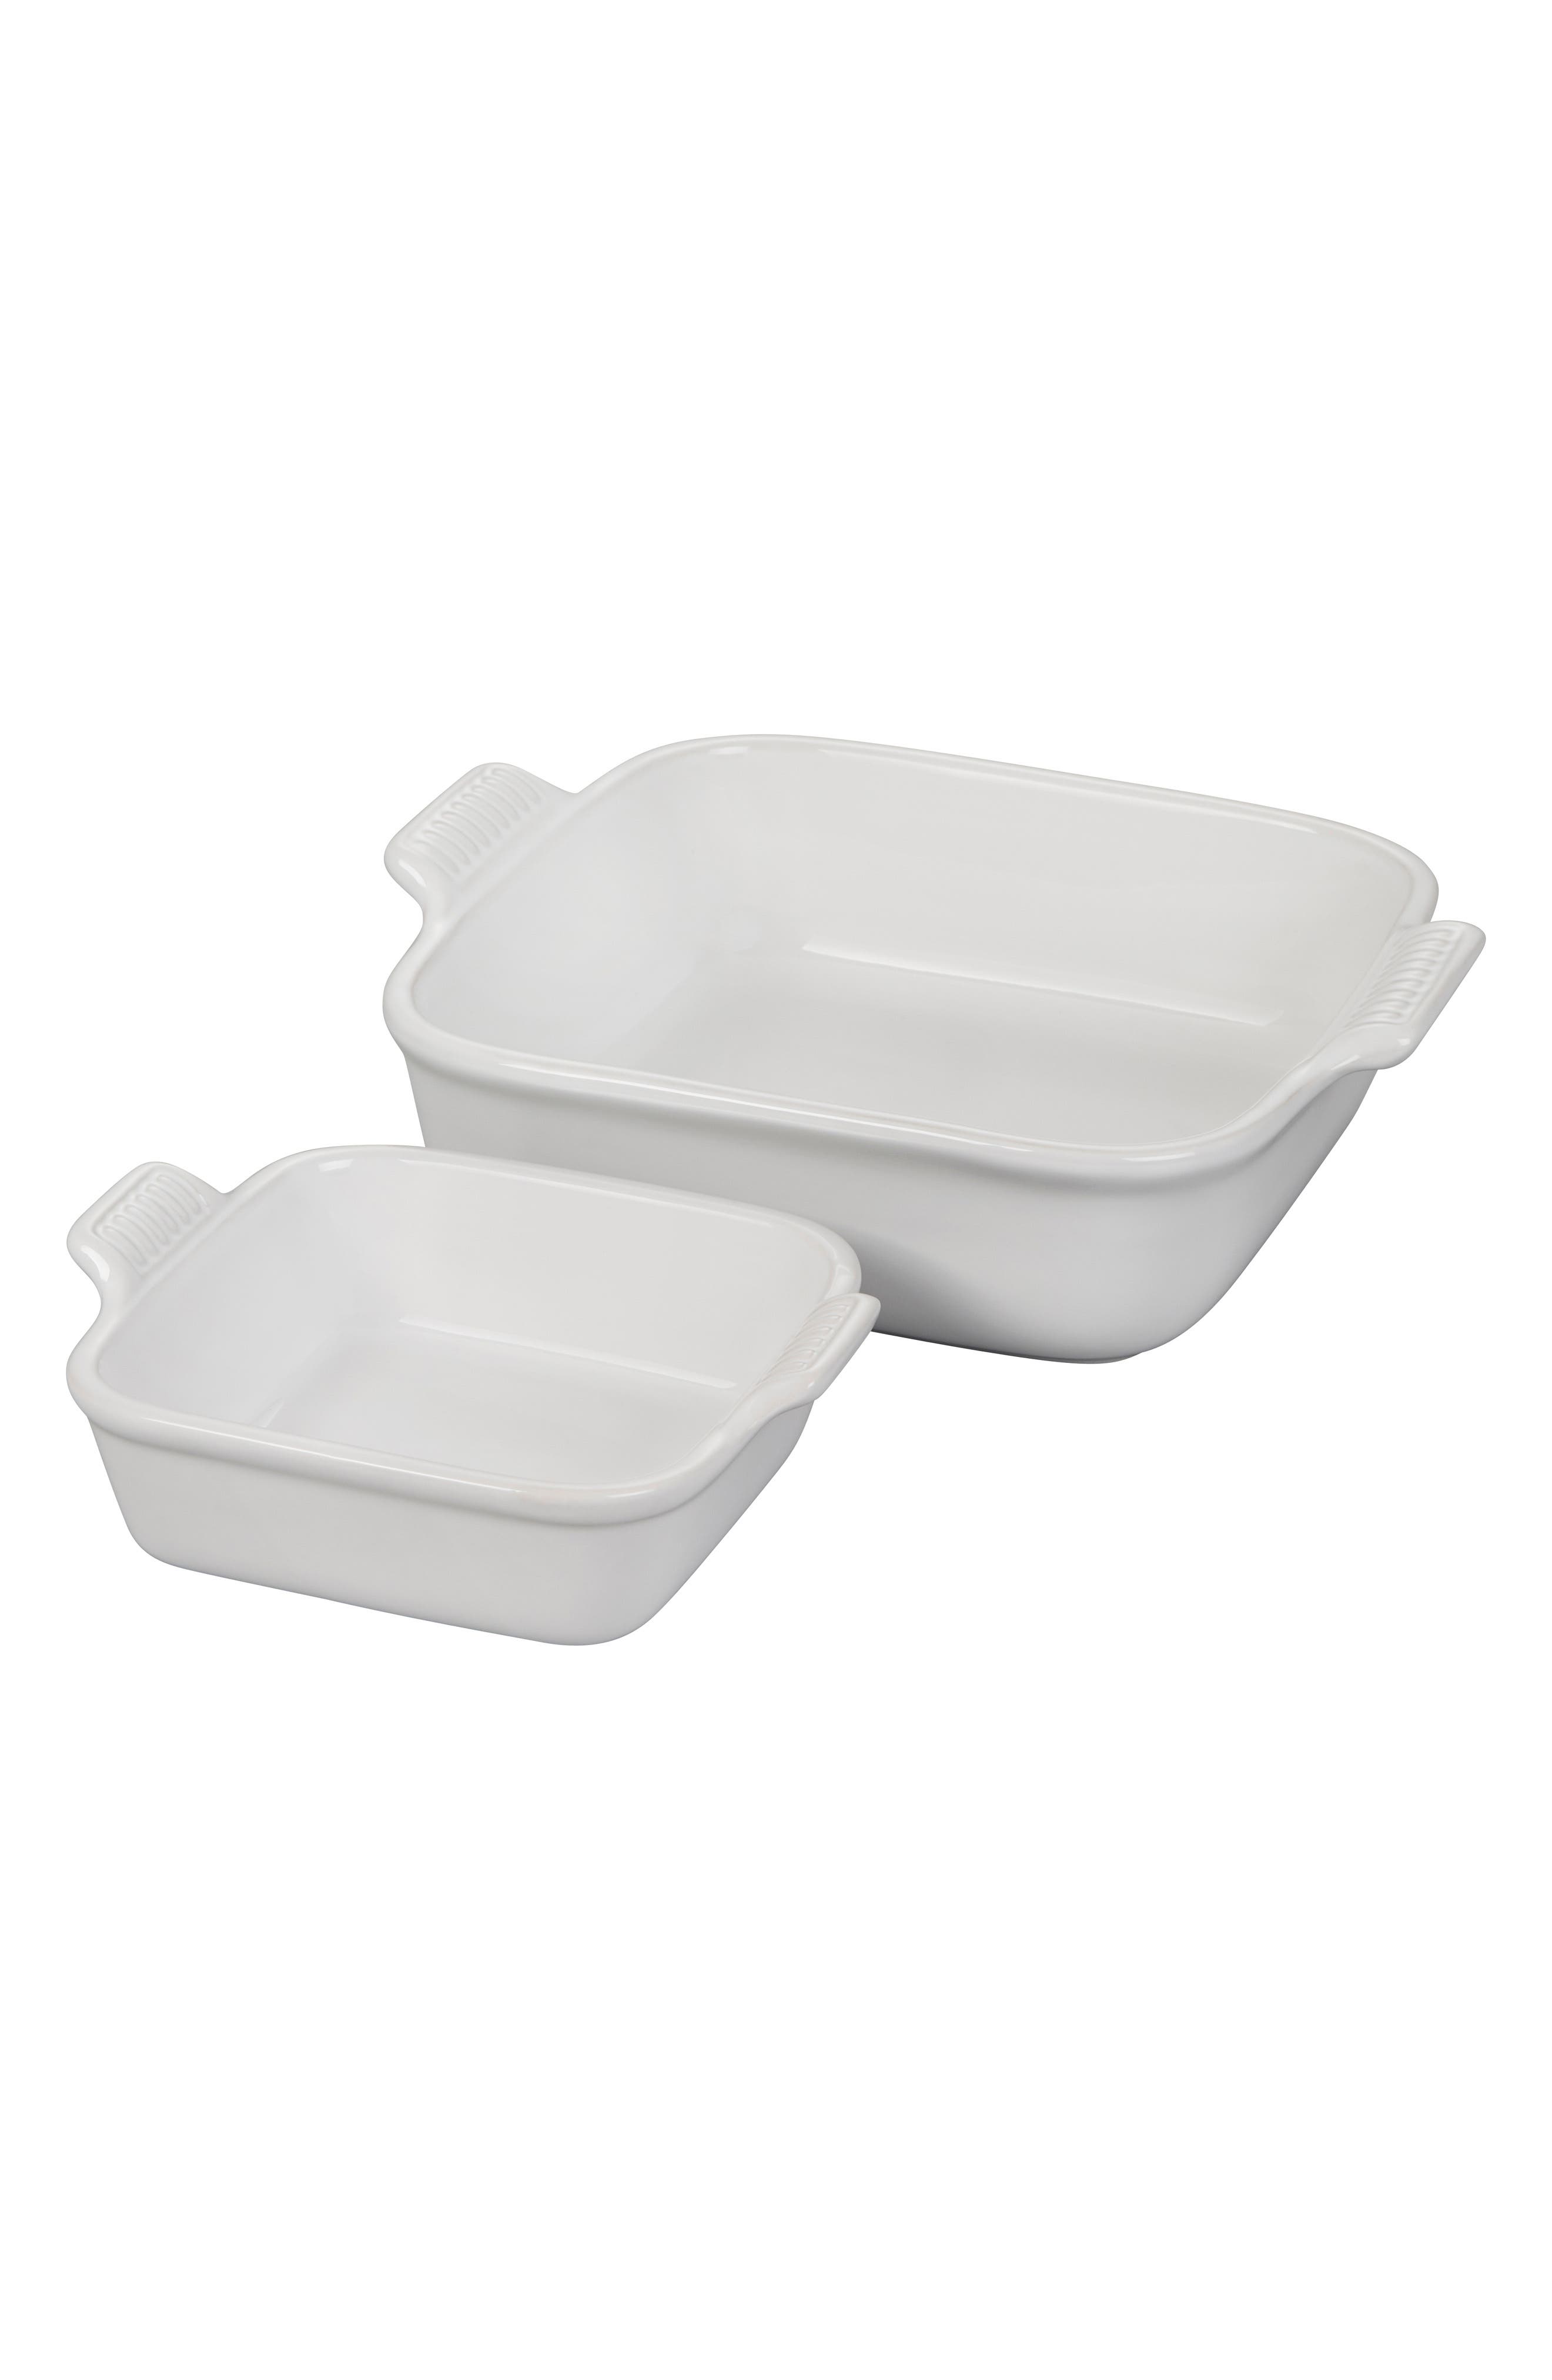 LE CREUSET NEW HERITAGE SET OF 2 SQUARE DISHES,630870289351